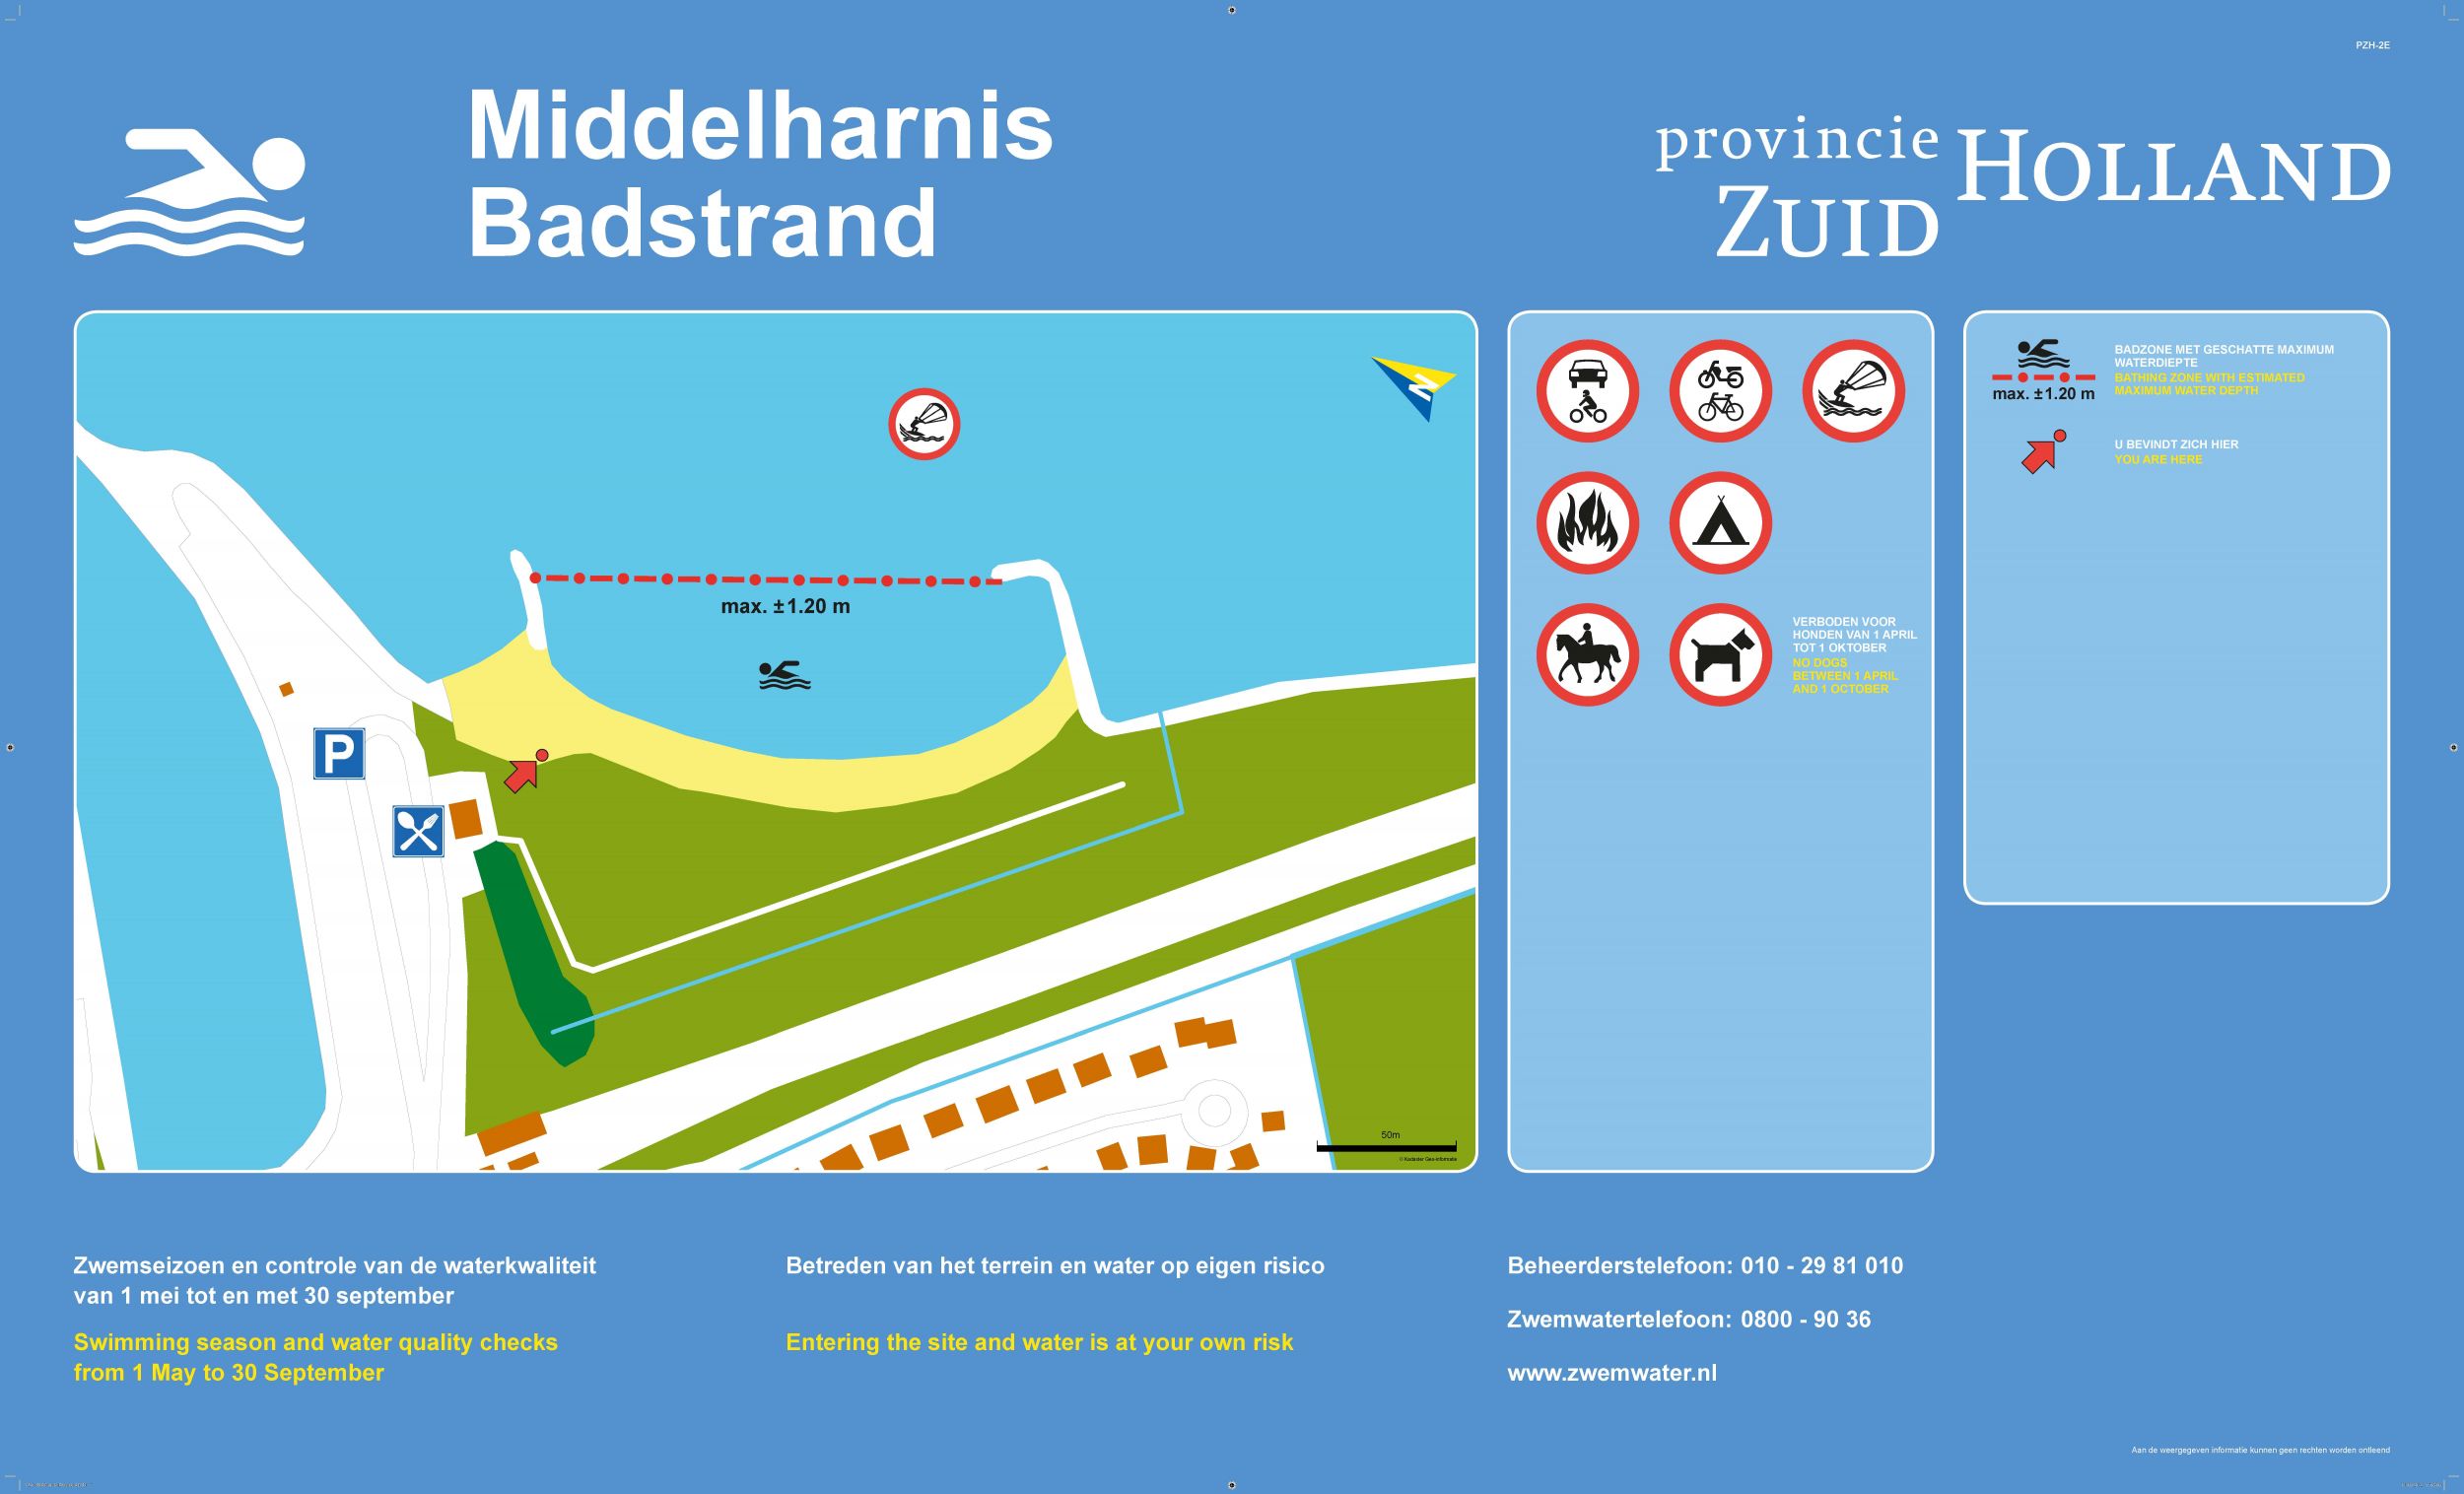 The information board at the swimming location Middelharnis Badstrand